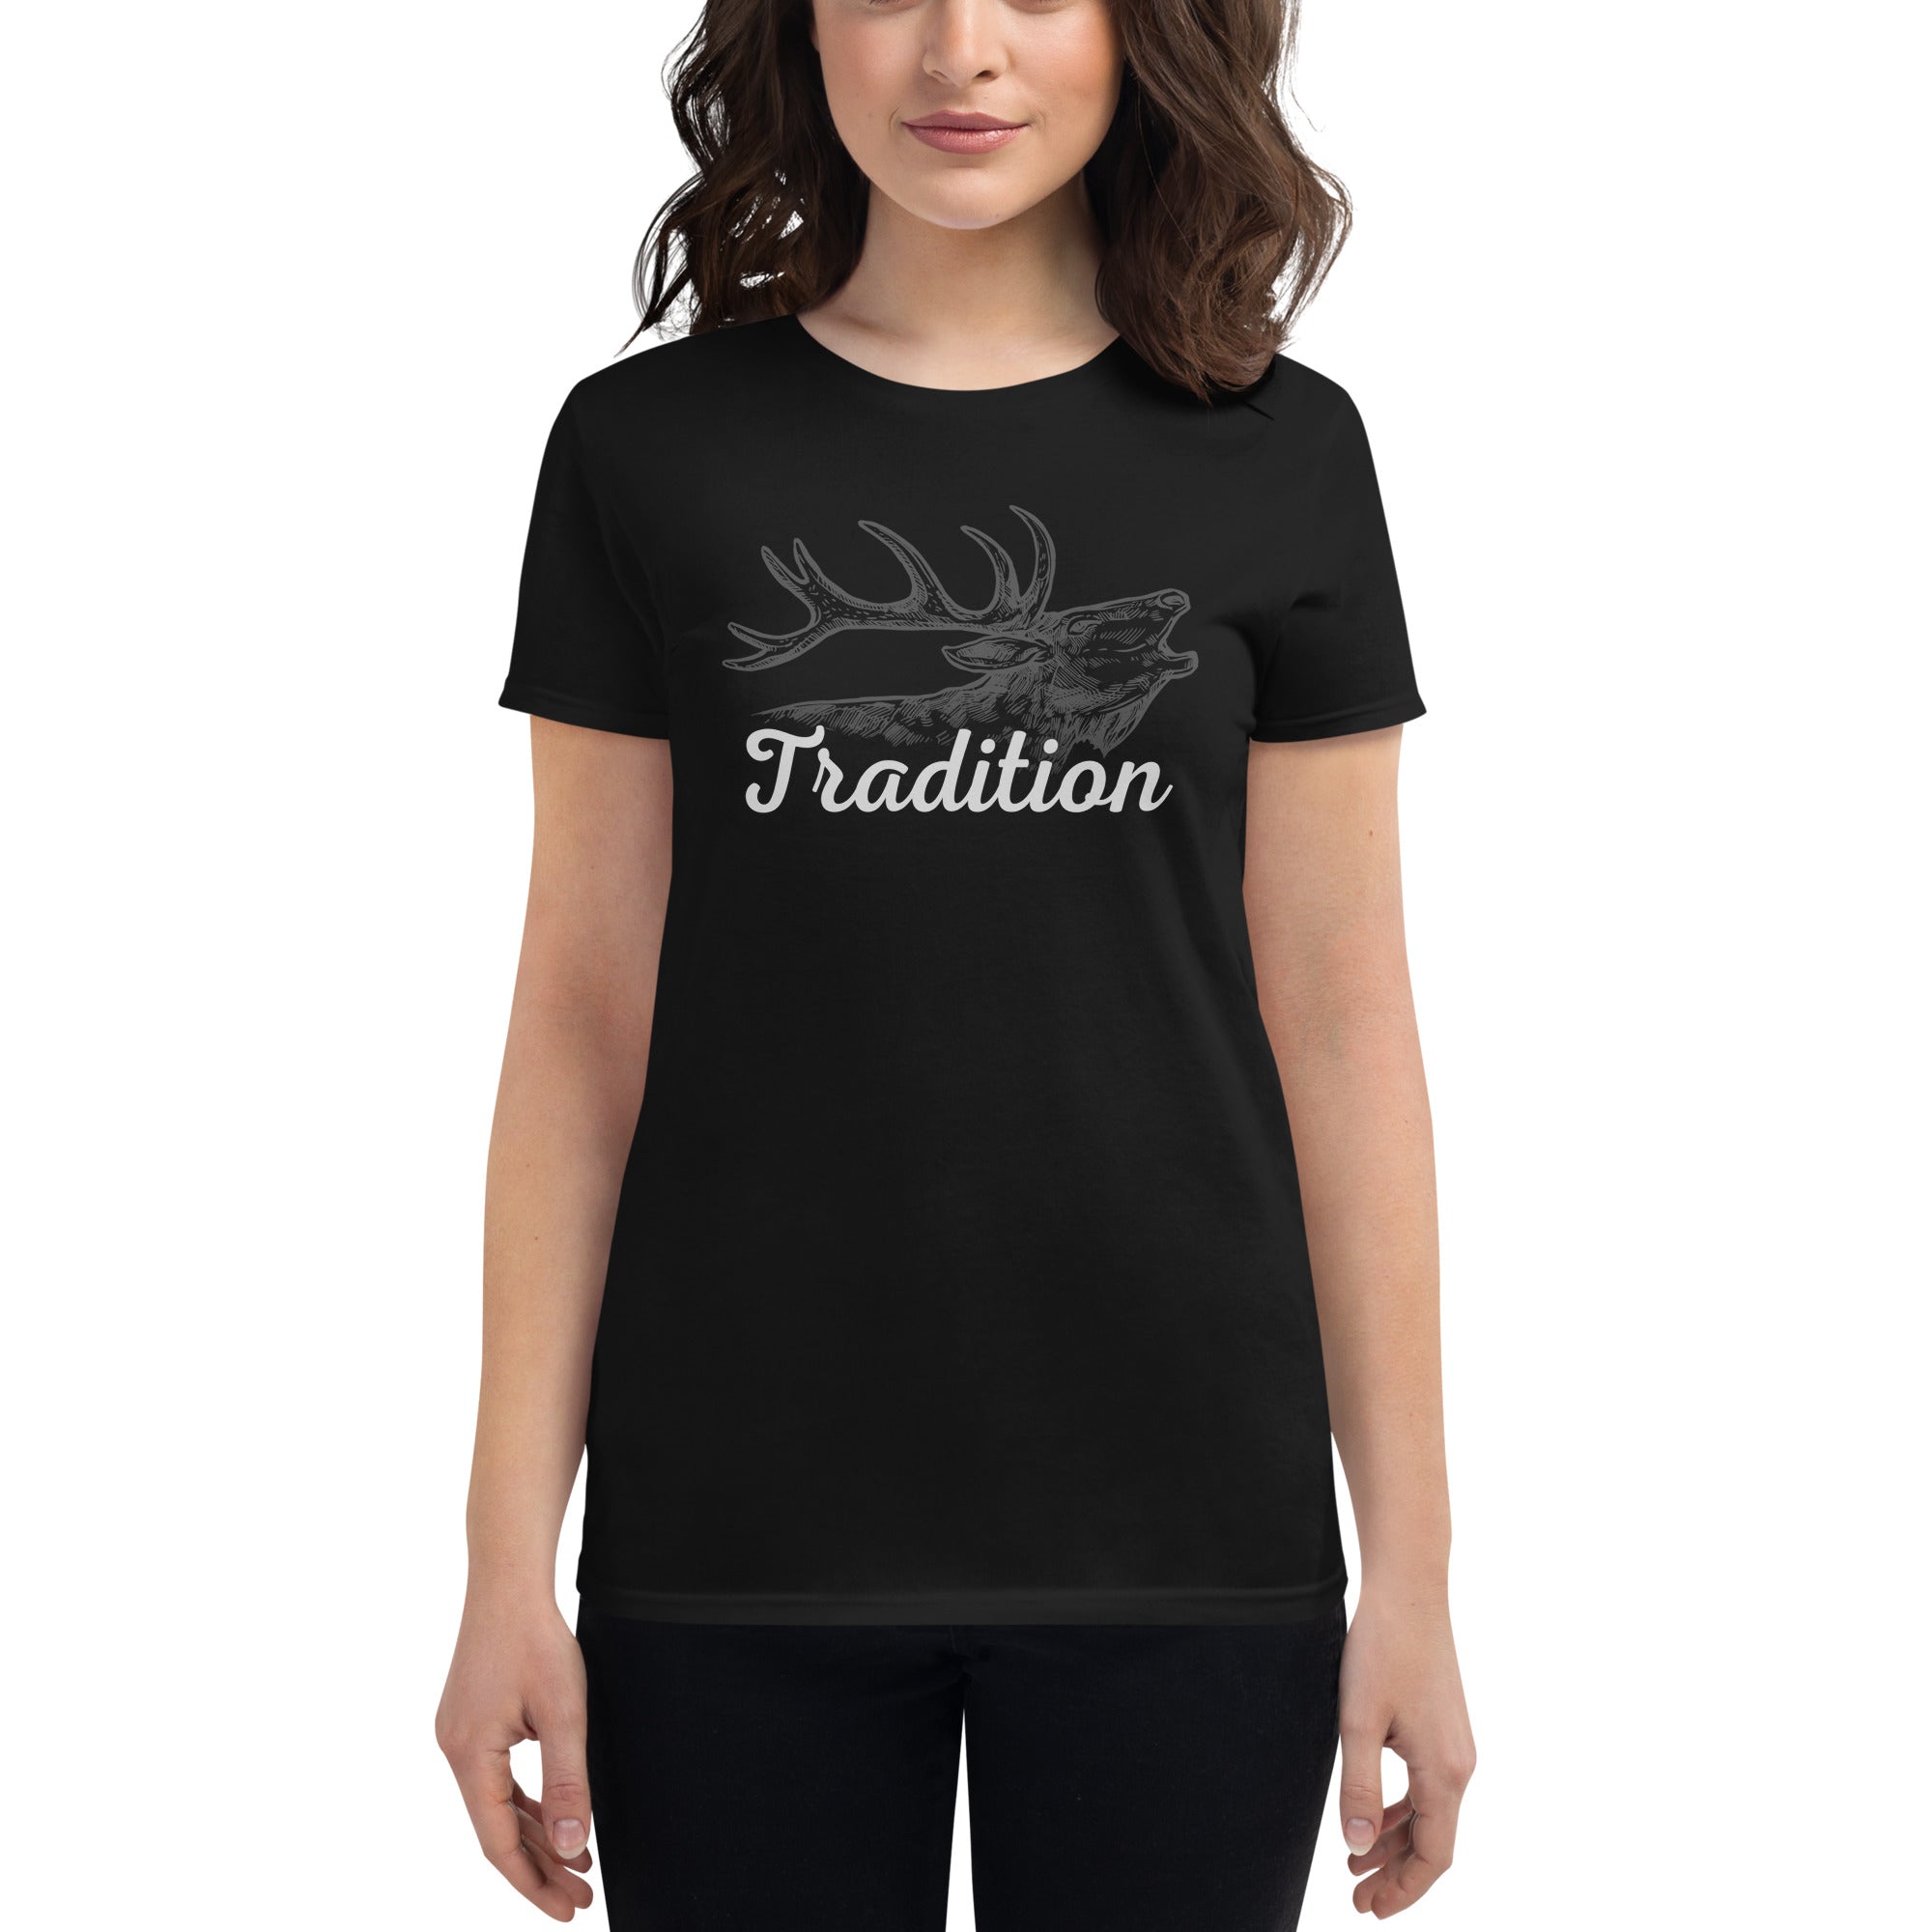 Tradition Women's Fitted T-Shirt